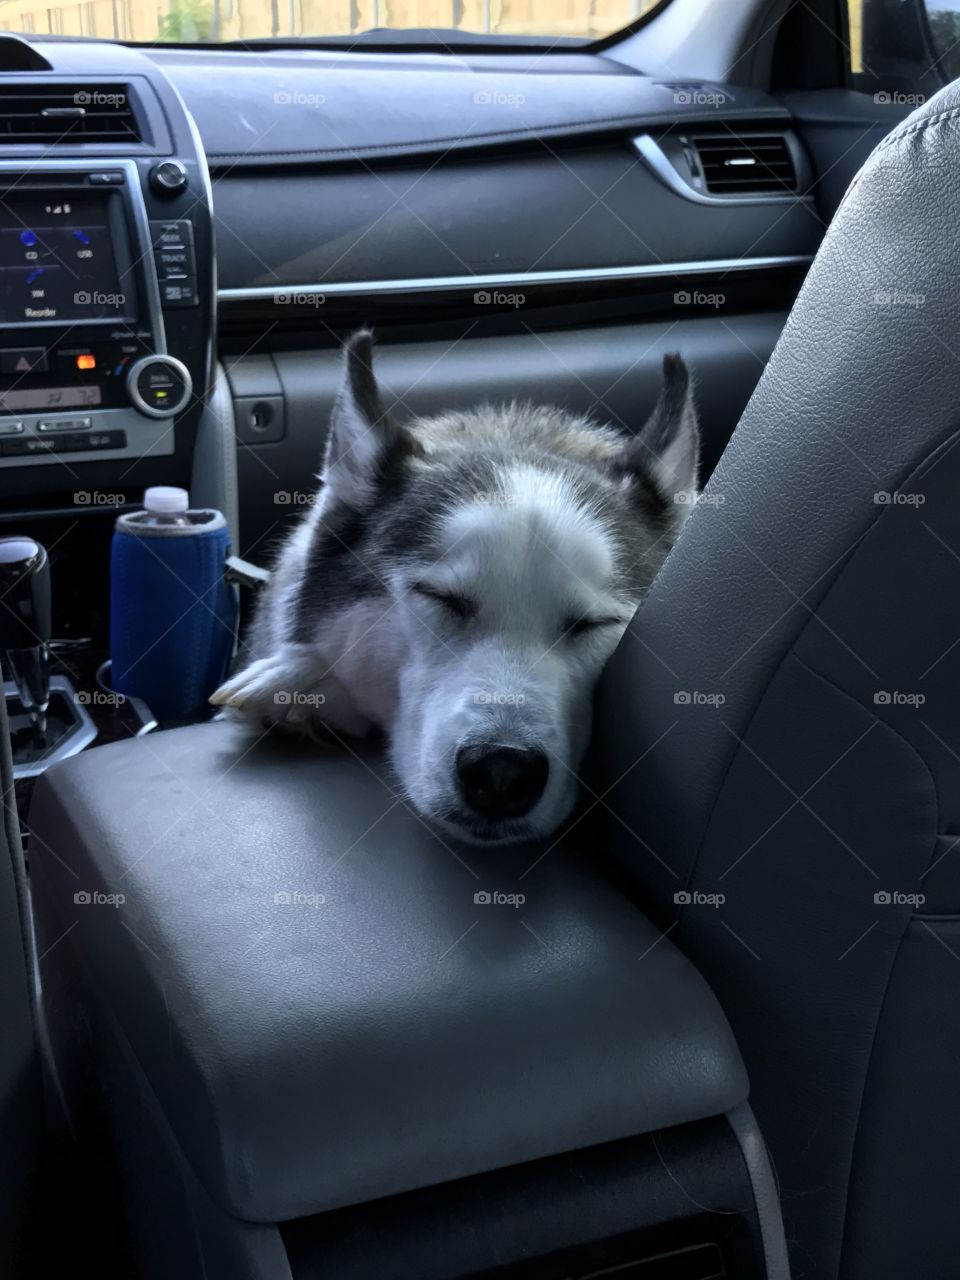 Road trips can be very tiring. 